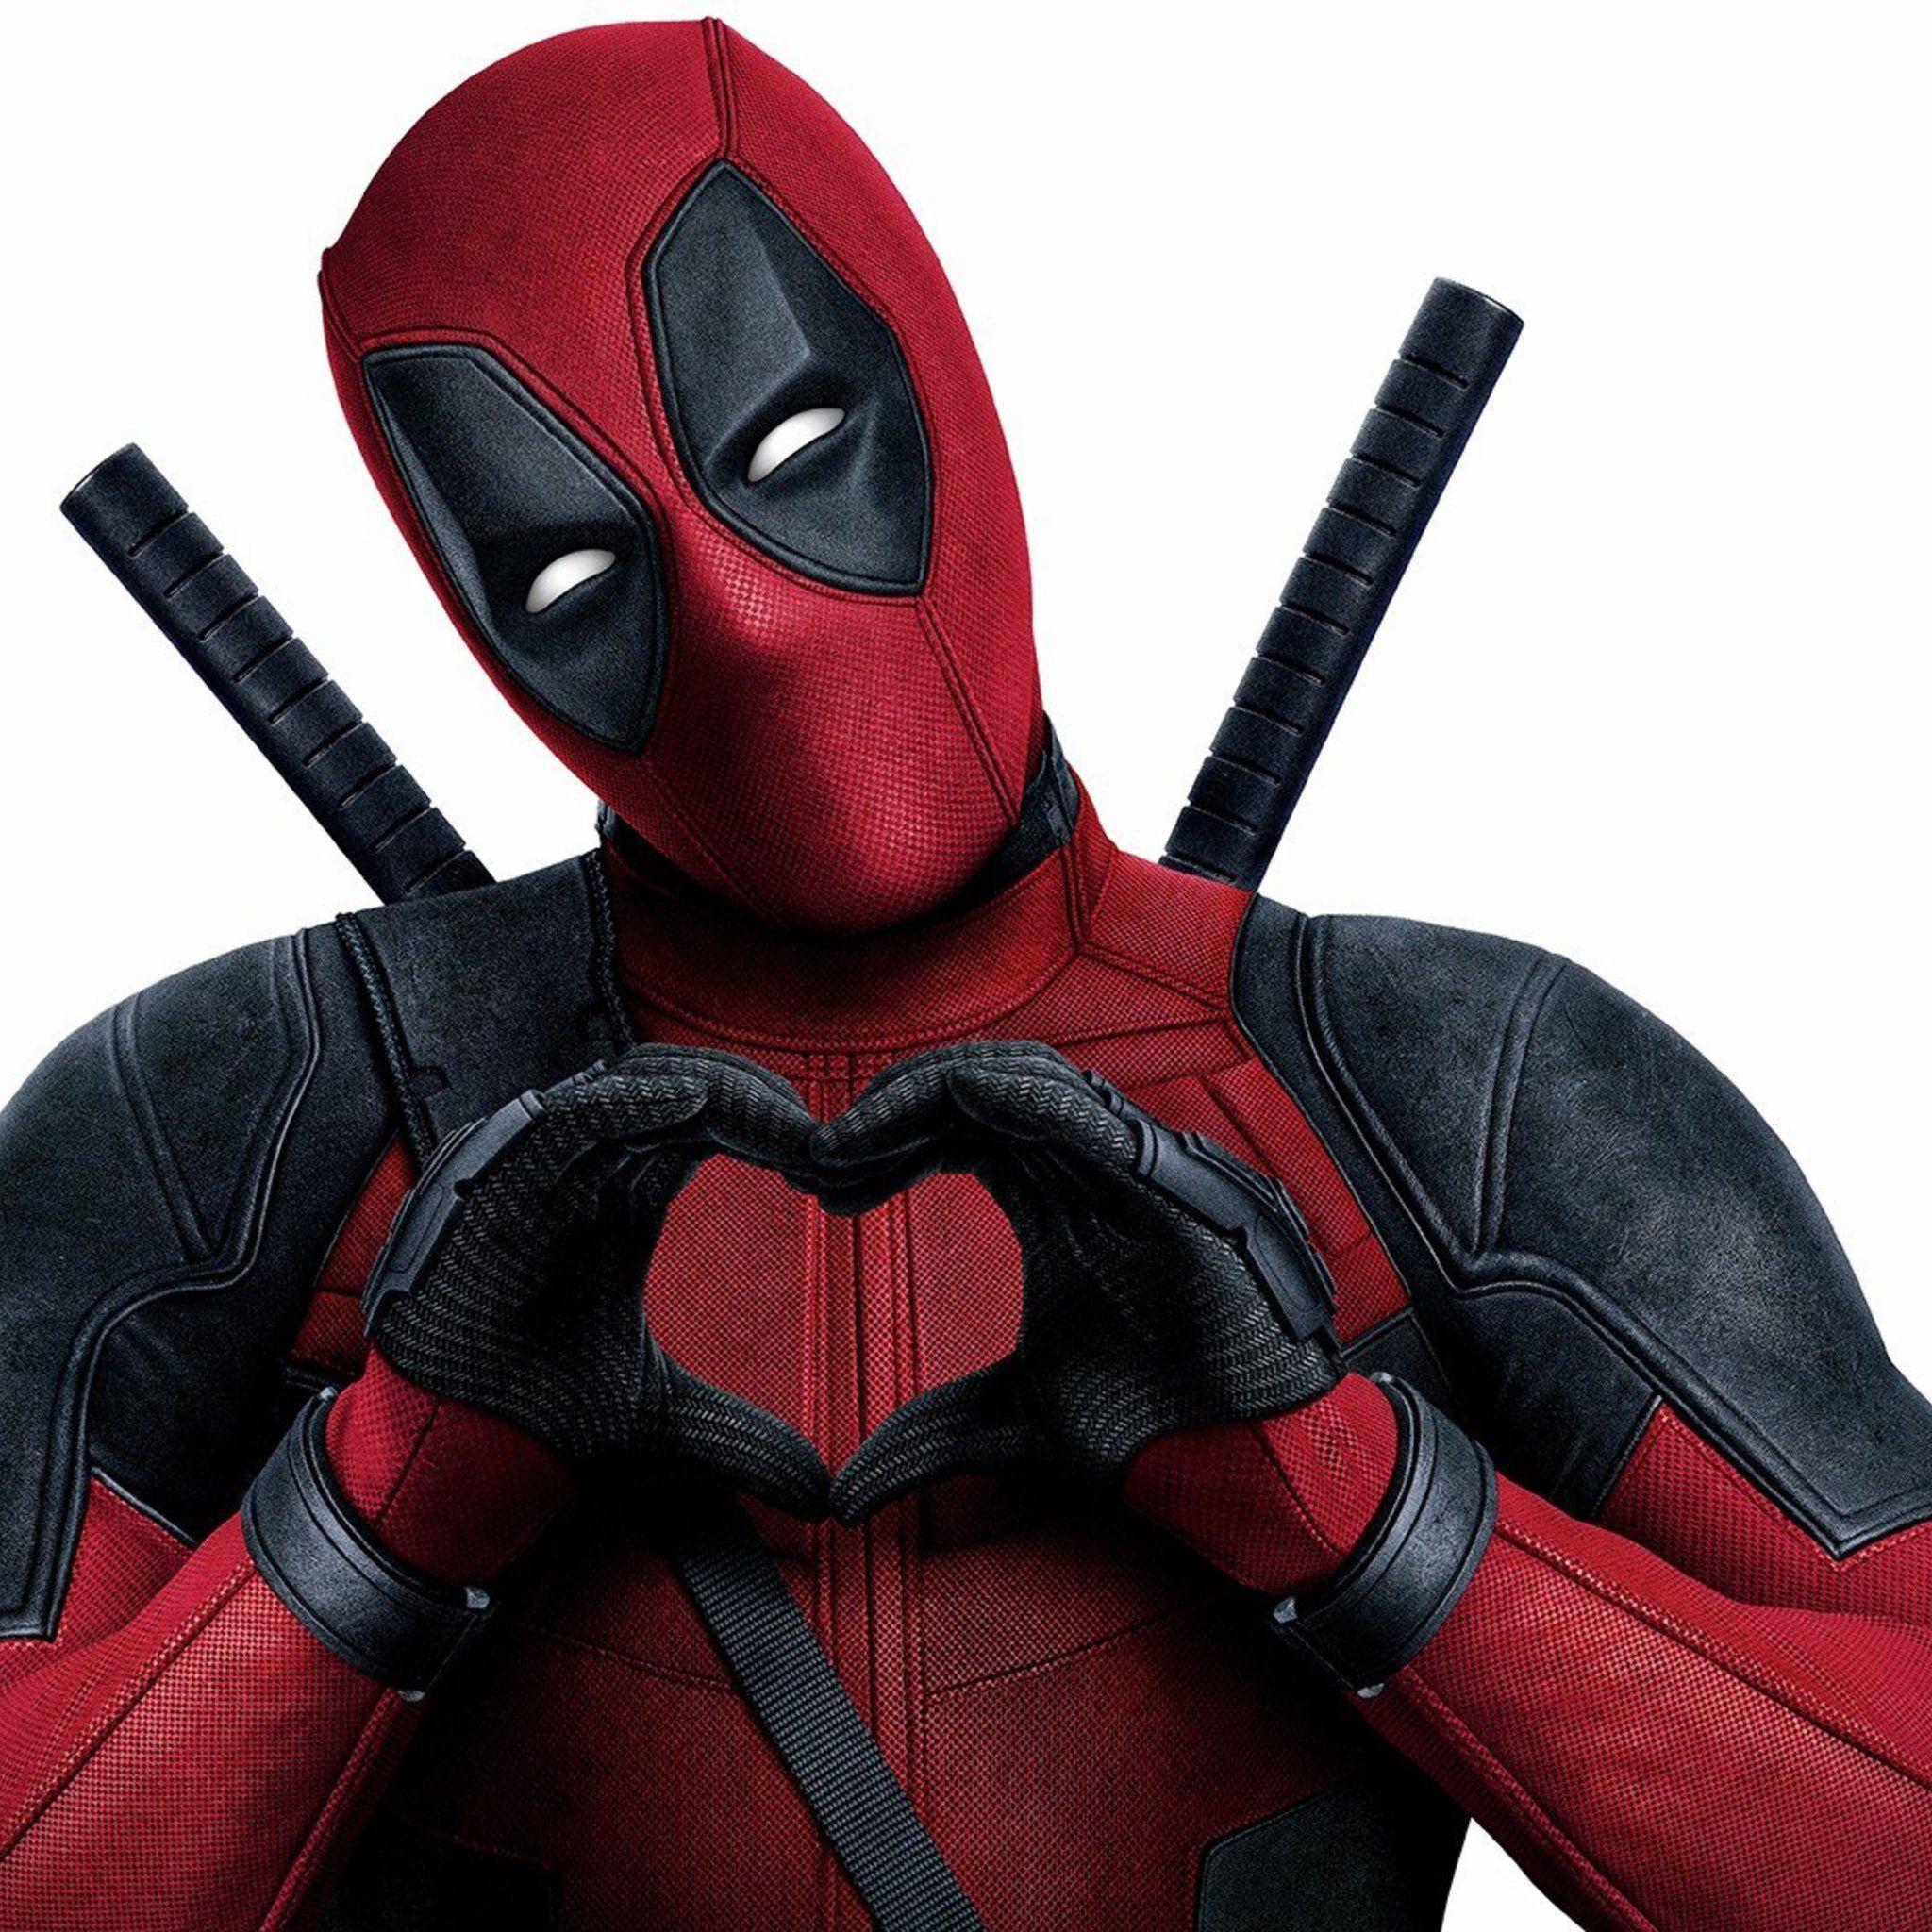 Deadpool love to see more The Merc with a Mouth: #deadpool wallpaper! - Deadpool valentines, Deadpool movie, Marvel deadpool movie